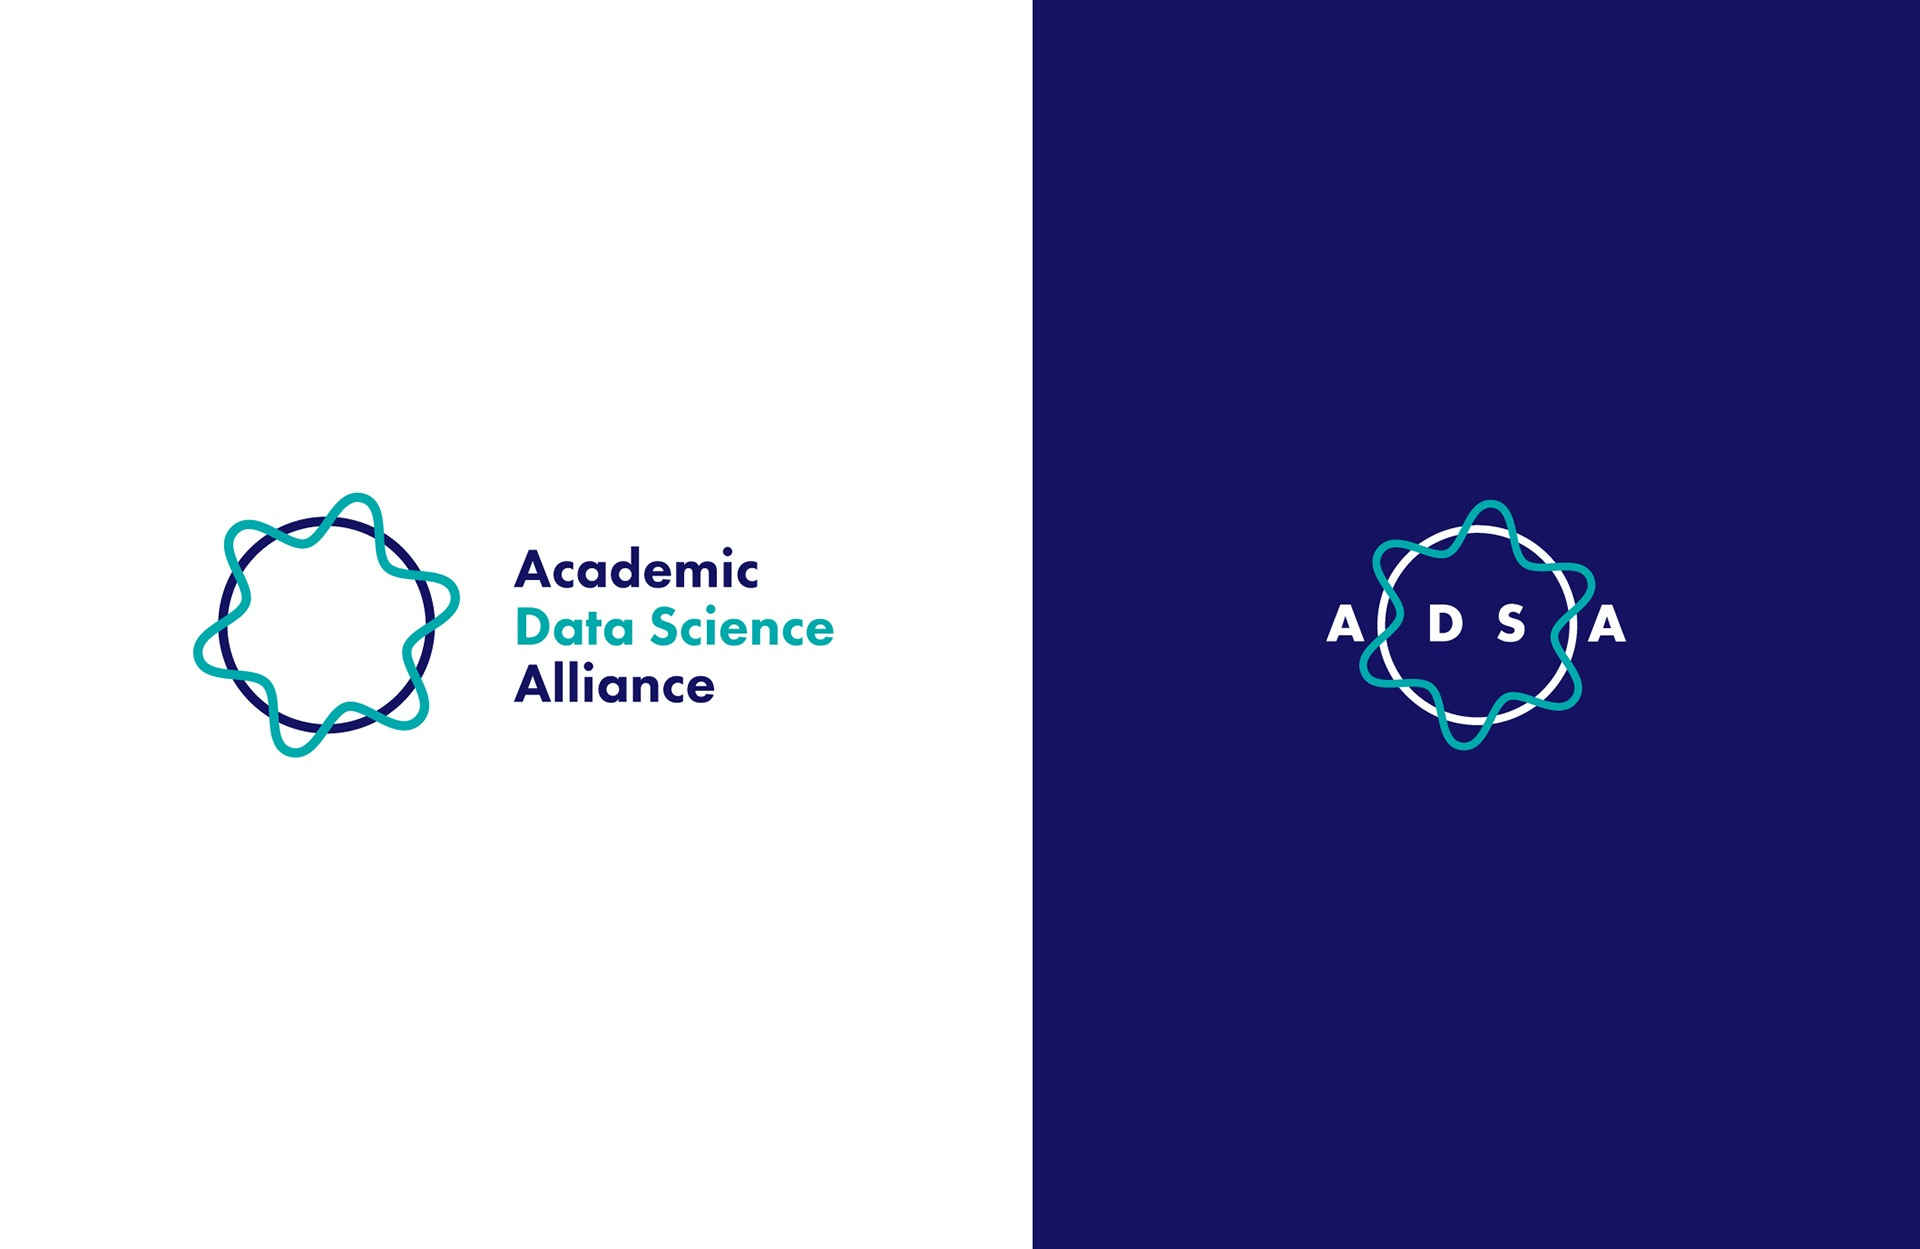 The full ADSA logo with the full organization title spelled out (Academic Data Science Alliance) and a logo bug with the acronym embedded (ADSA)